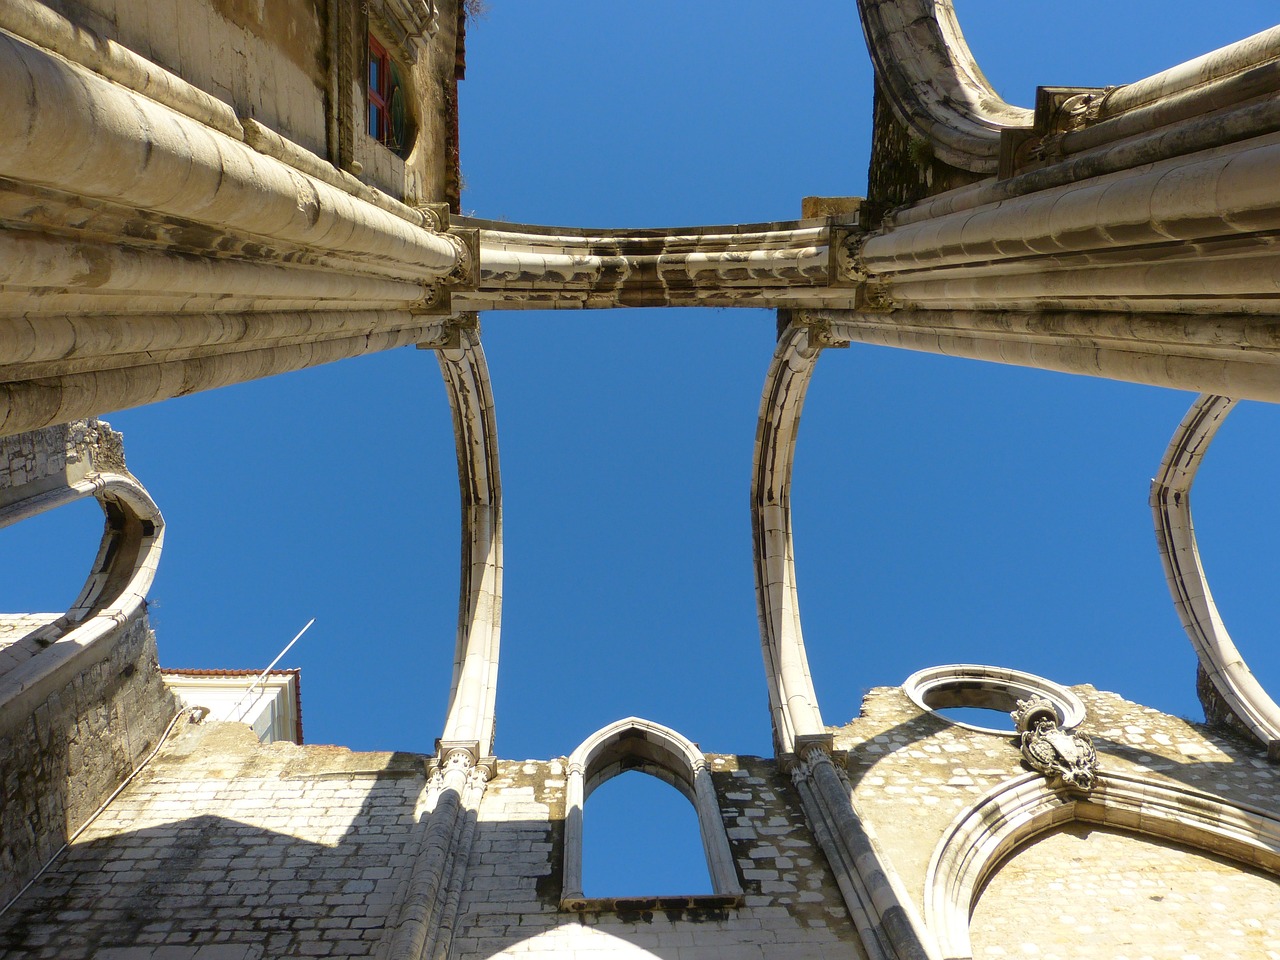 a very tall building with a blue sky in the background, a picture, flickr, romanesque, inside the ruined gothic church, lisbon, upsidedown, arcs